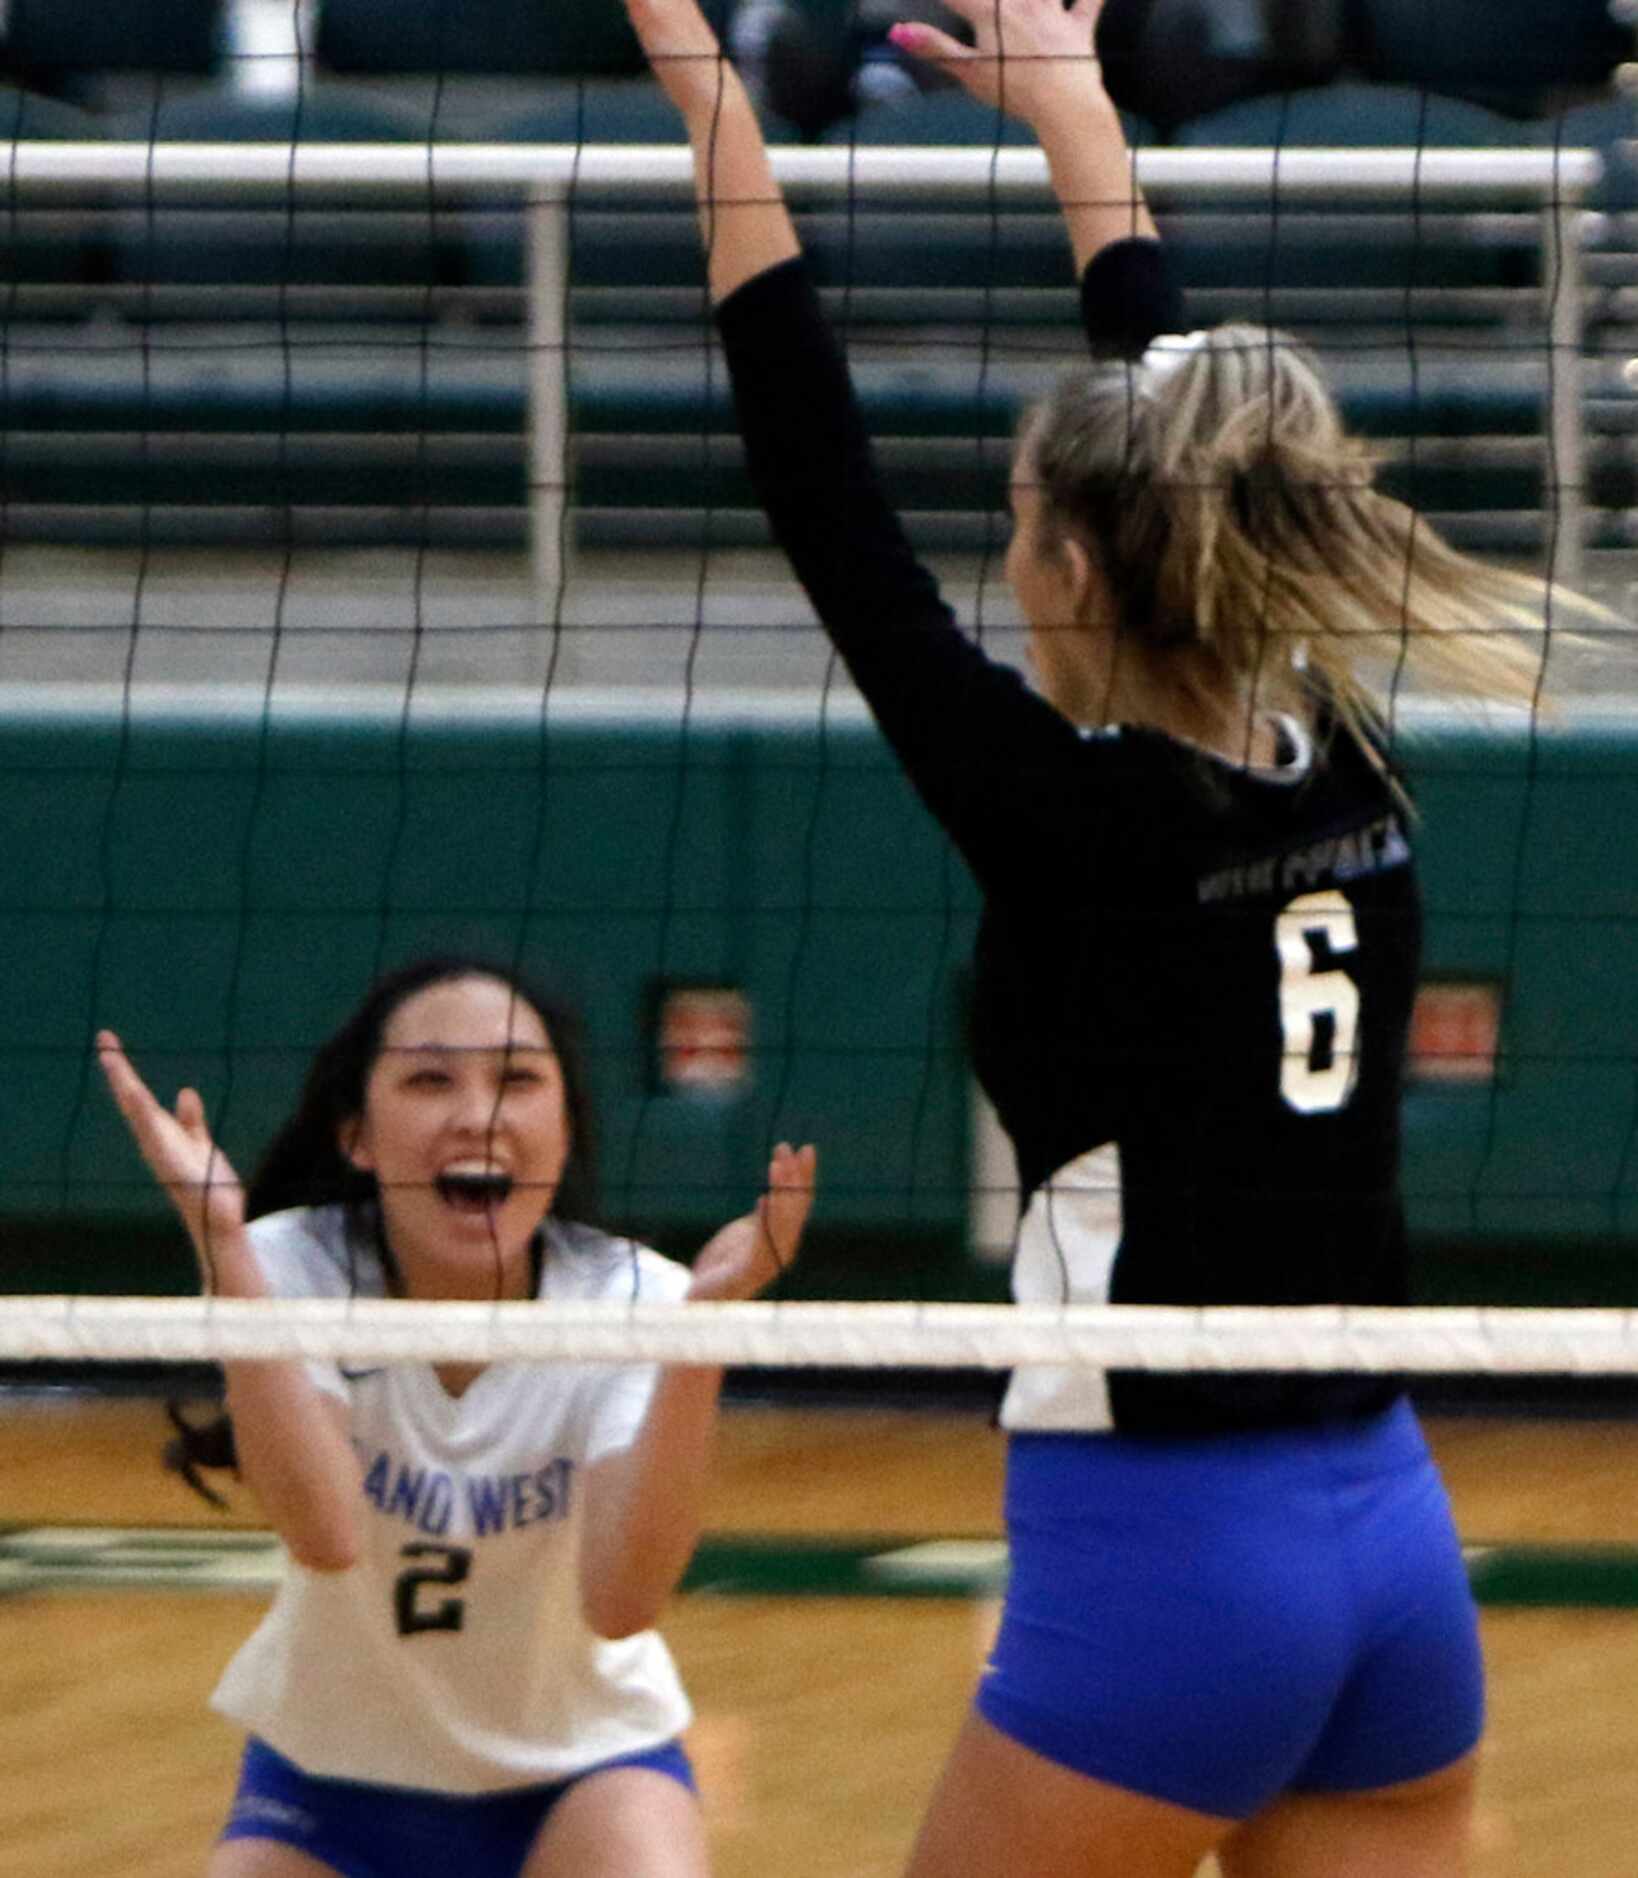 Lindsey Zhang (2) of Plano West, was all smiles after teammate Noelle Piatas (6) blocked the...